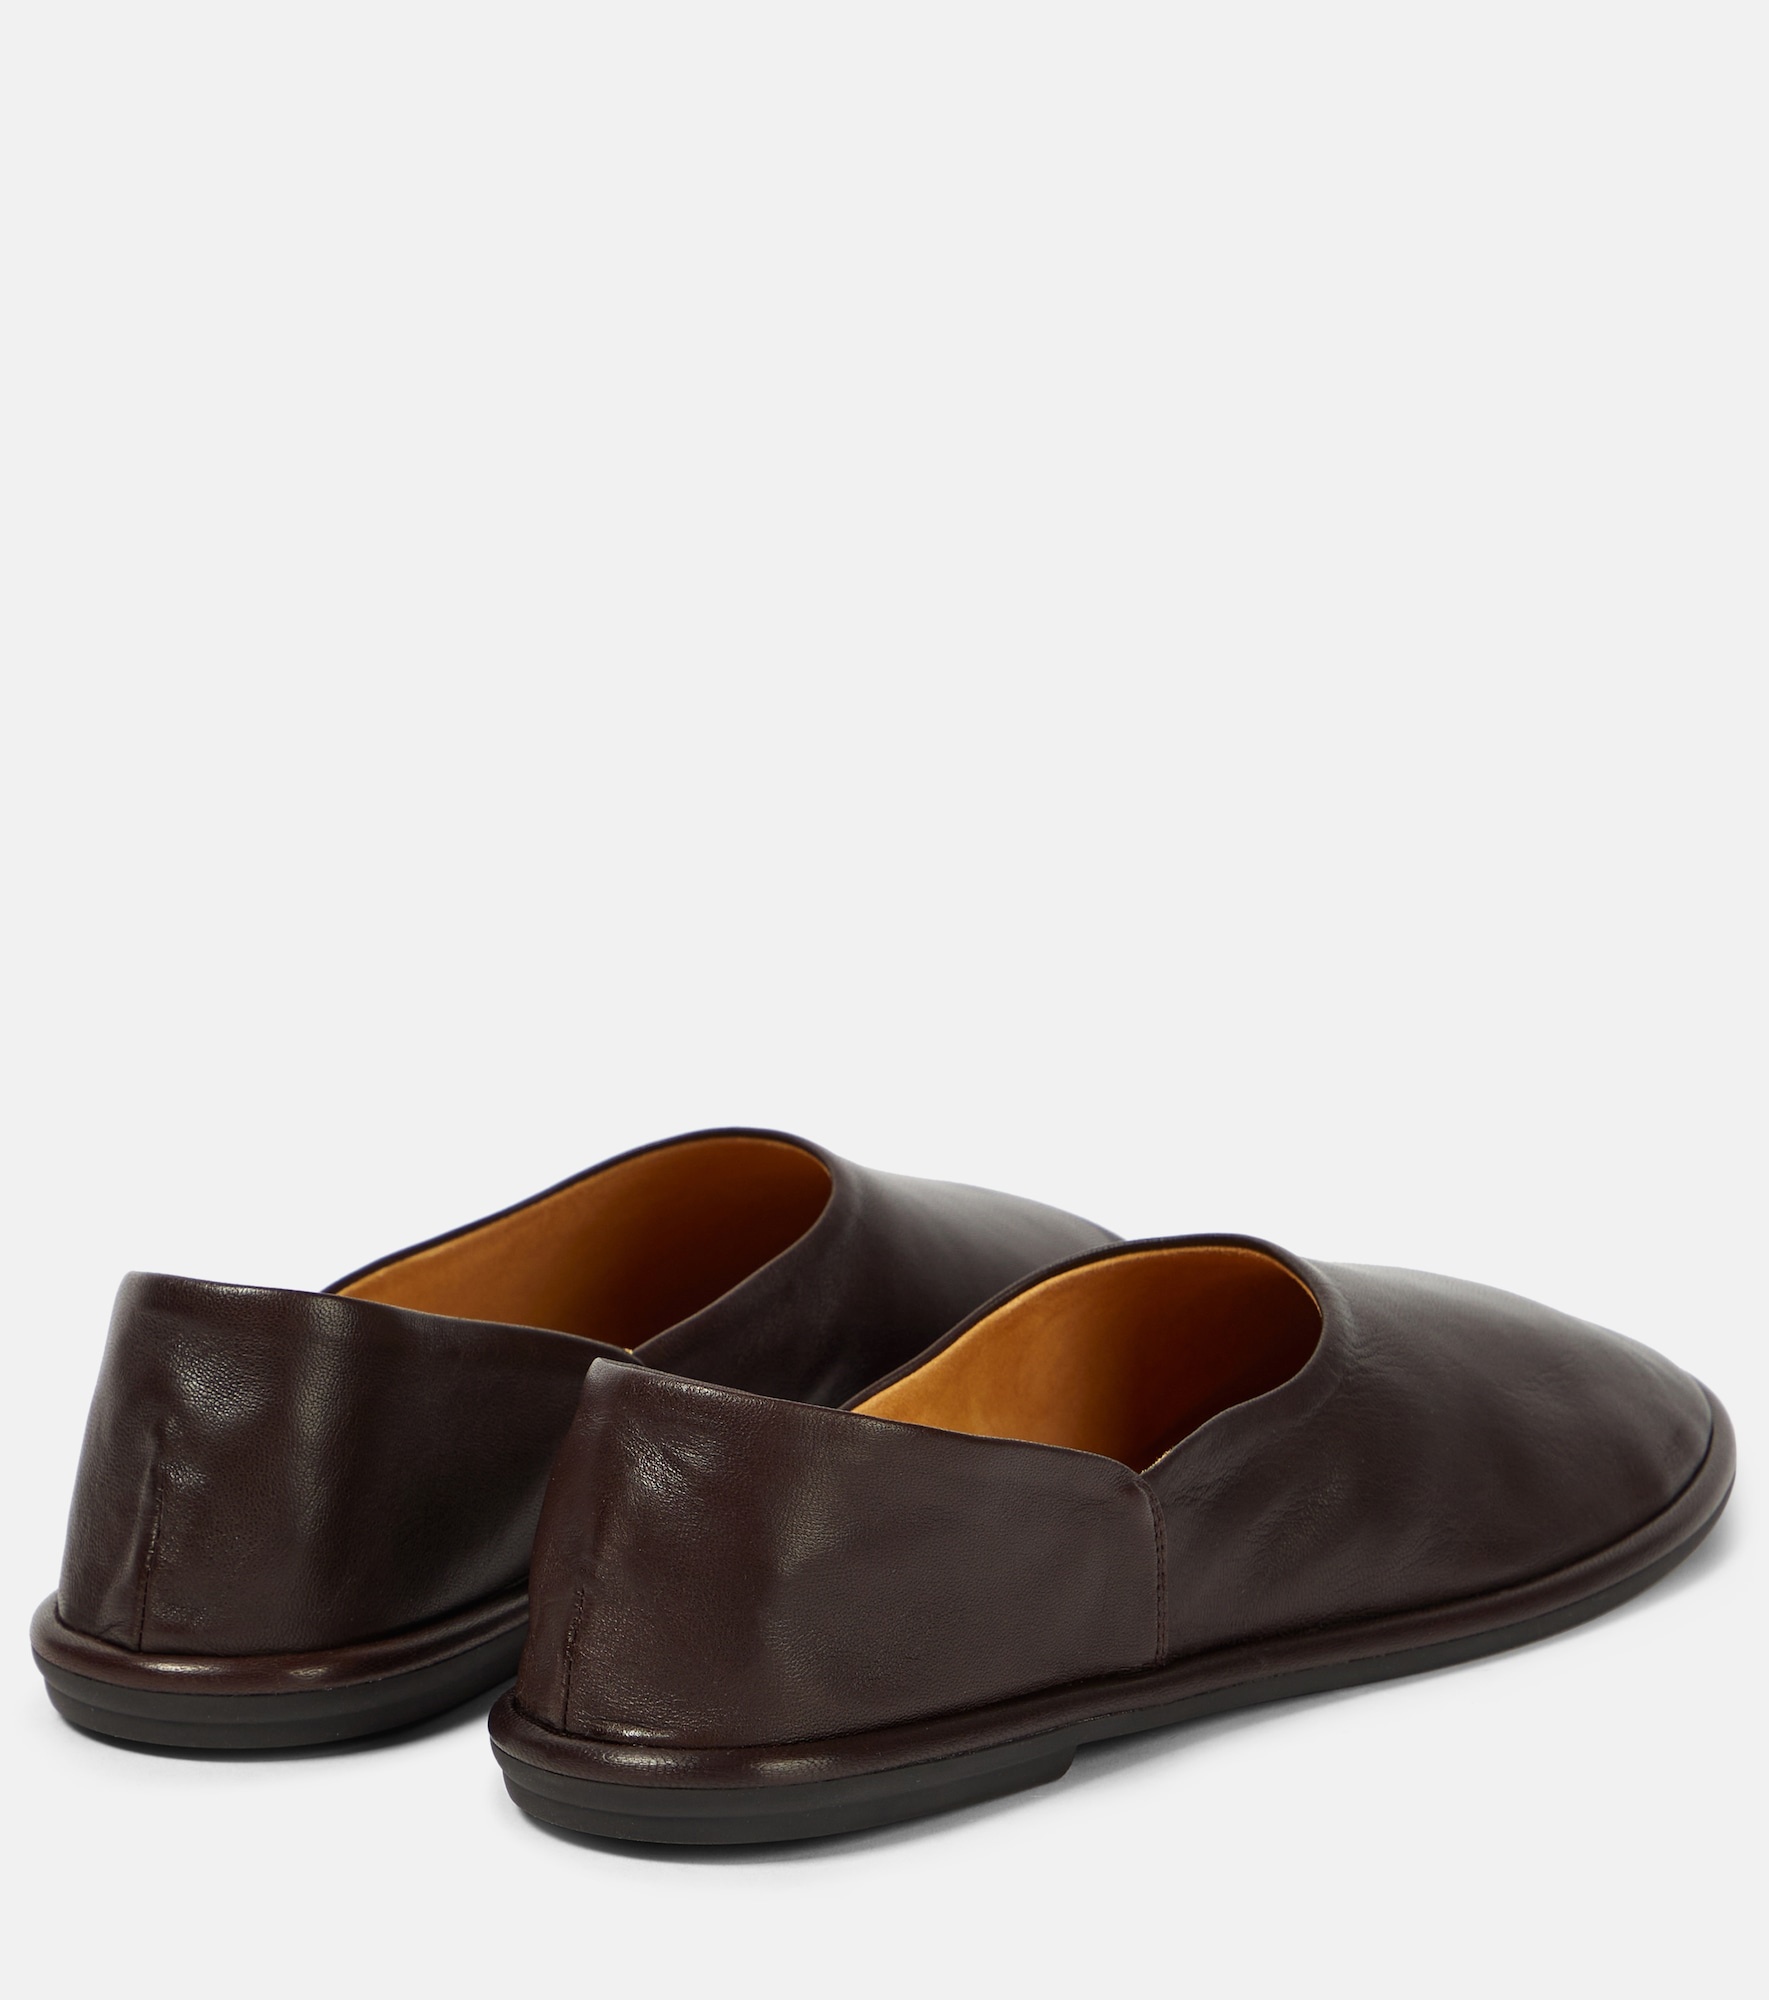 Canal leather flats - 3